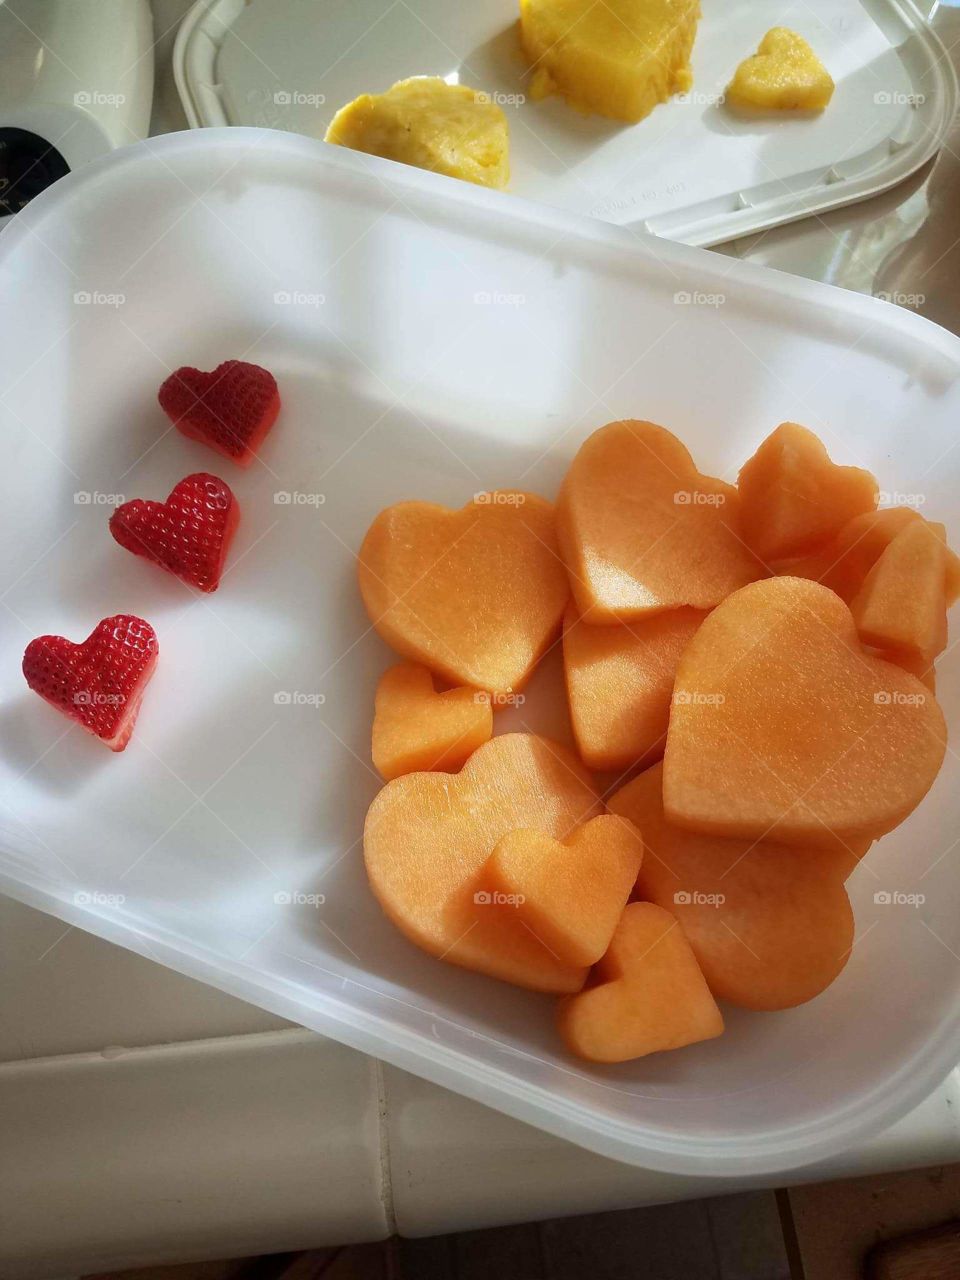 heart shape strawberries and melon